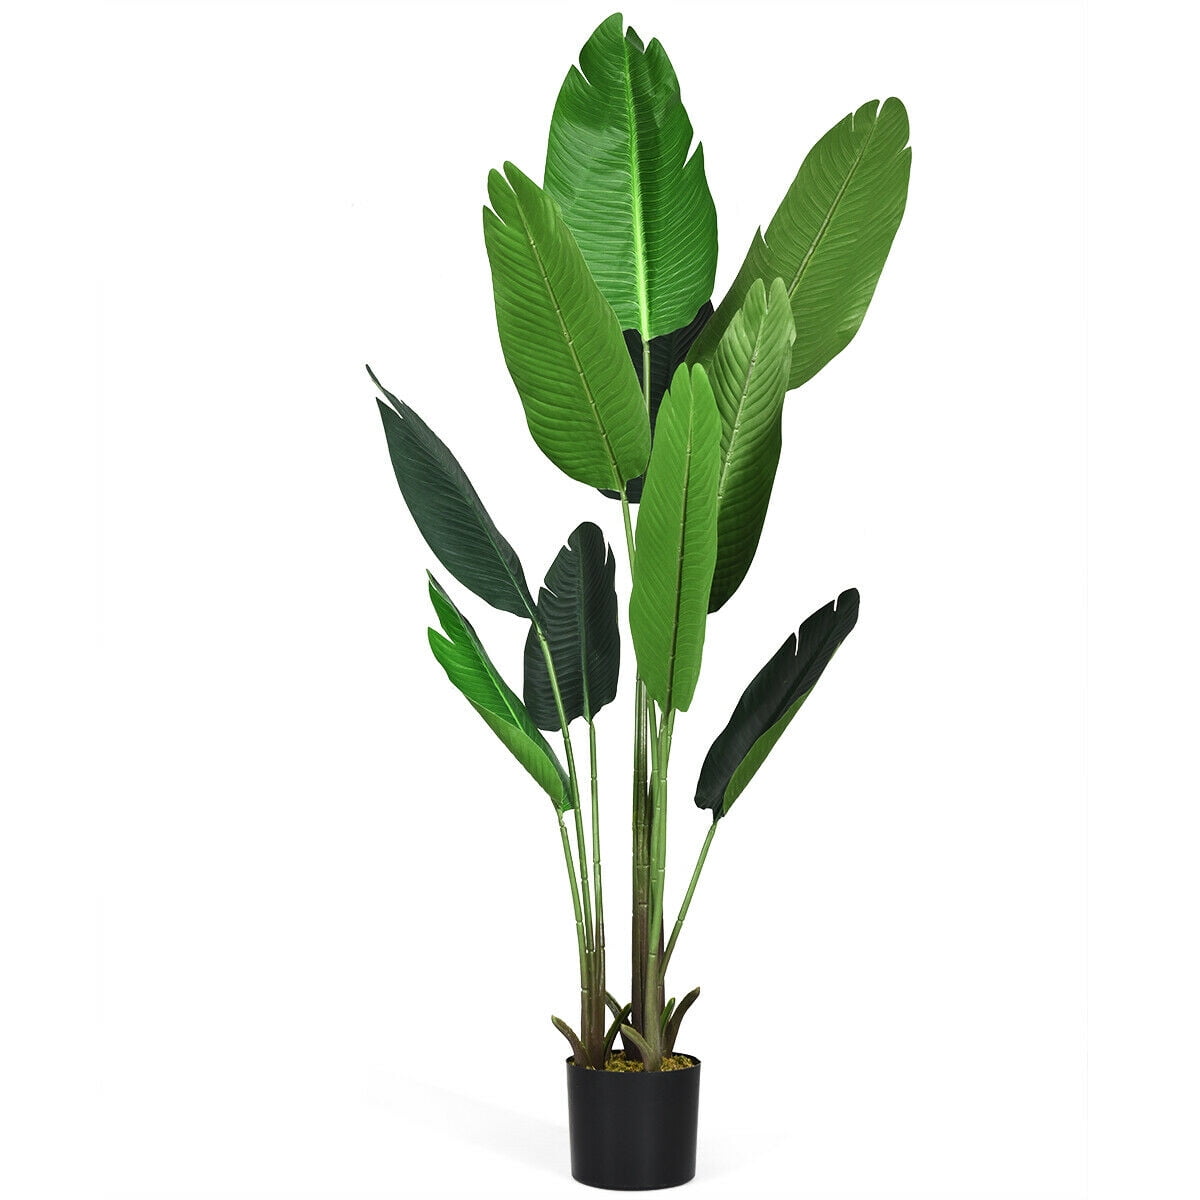 5 FT Artificial Tropical Palm Tree Green Indoor-Outdoor Home Decorative Planter 